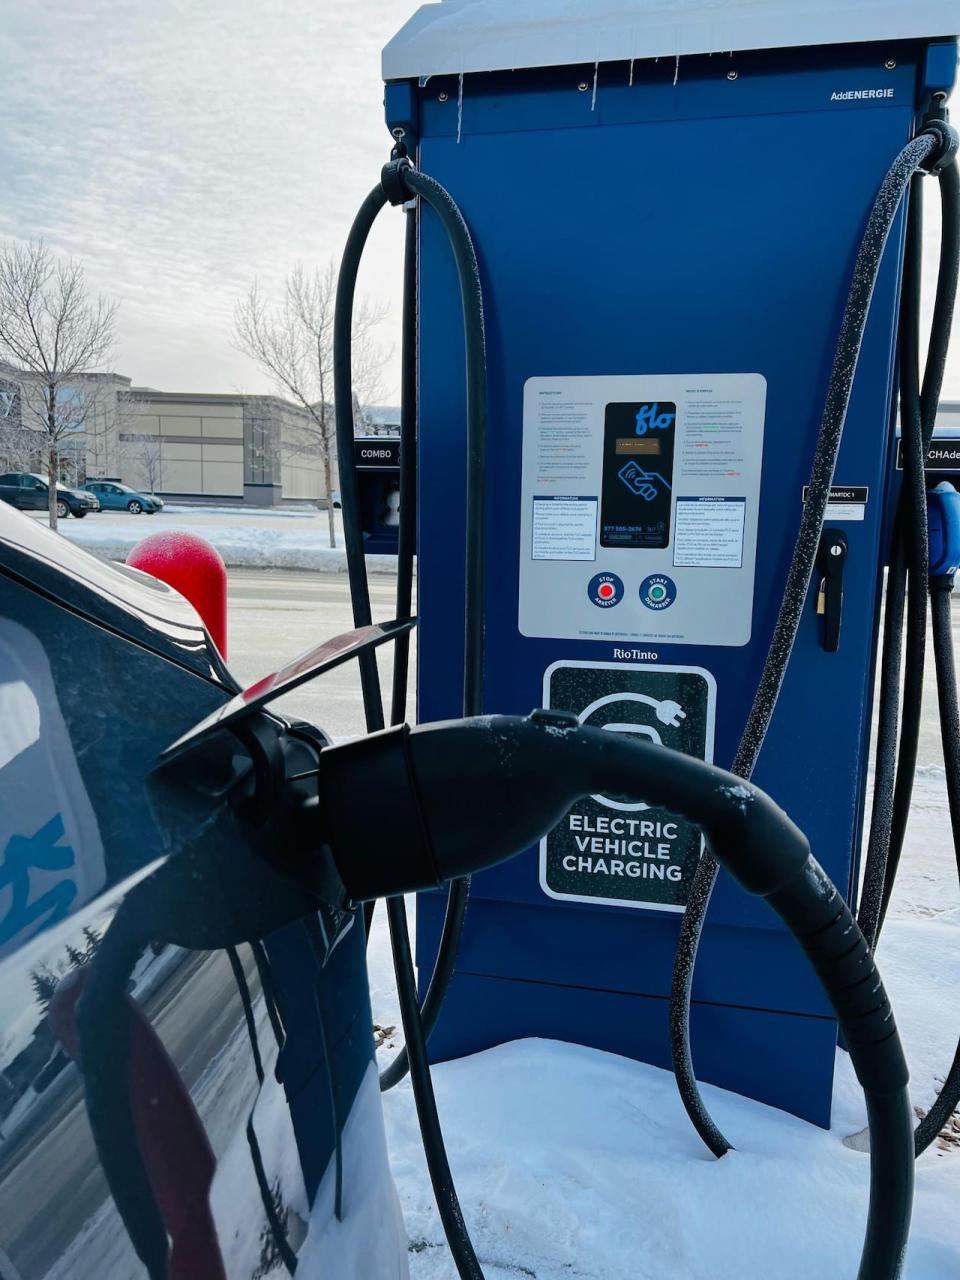 One of the locations for fast-charging electric vehicles in Saskatoon is in Stonebridge. (Plugshare.com - image credit)